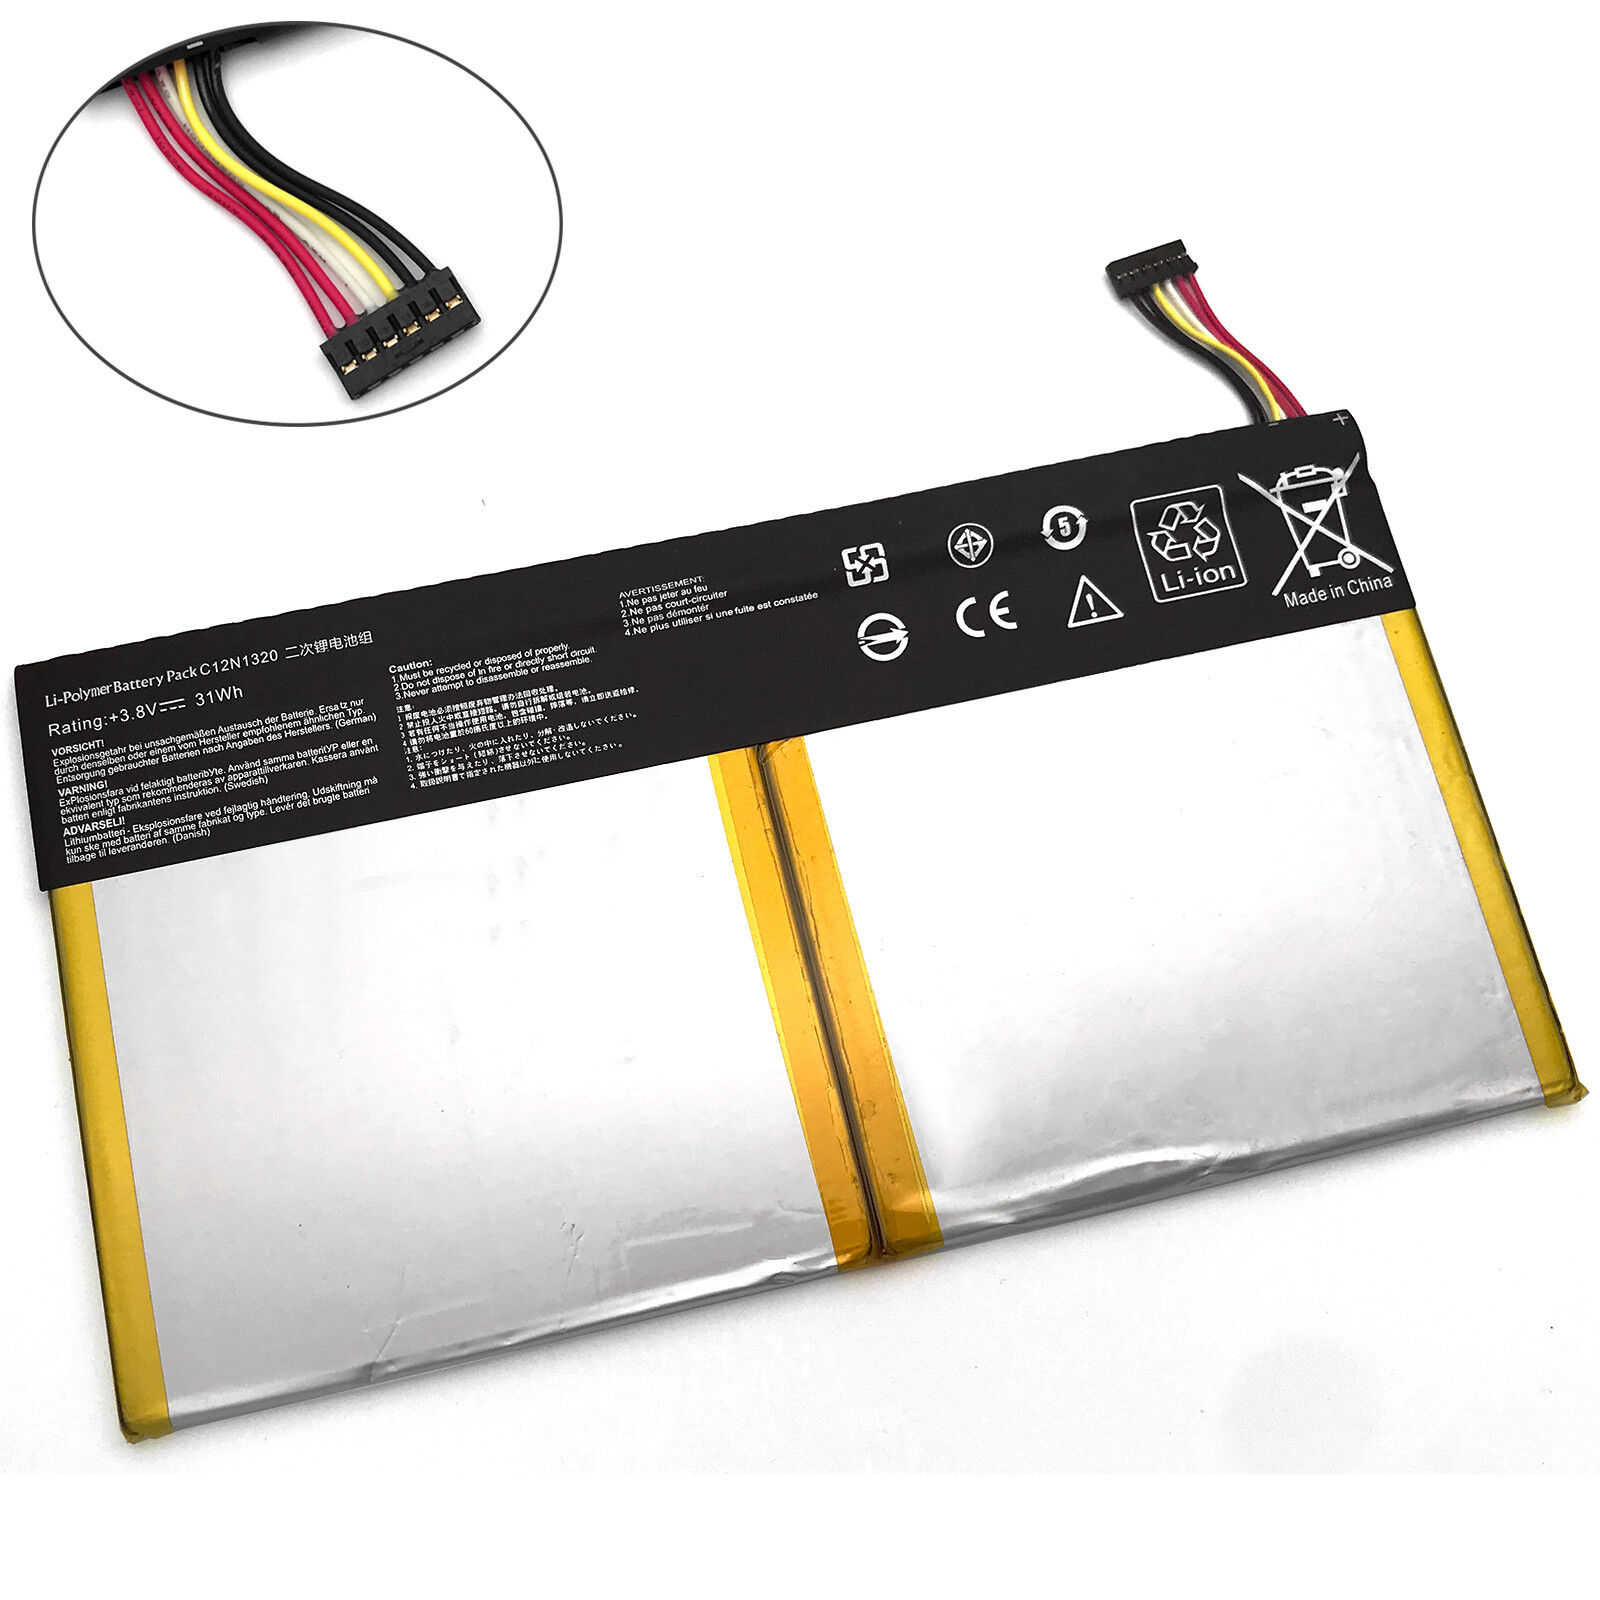 31Wh Battery For Asus Transformer Book T100T T100TA T101TA Series C12N1320 Unbranded Does Not Apply